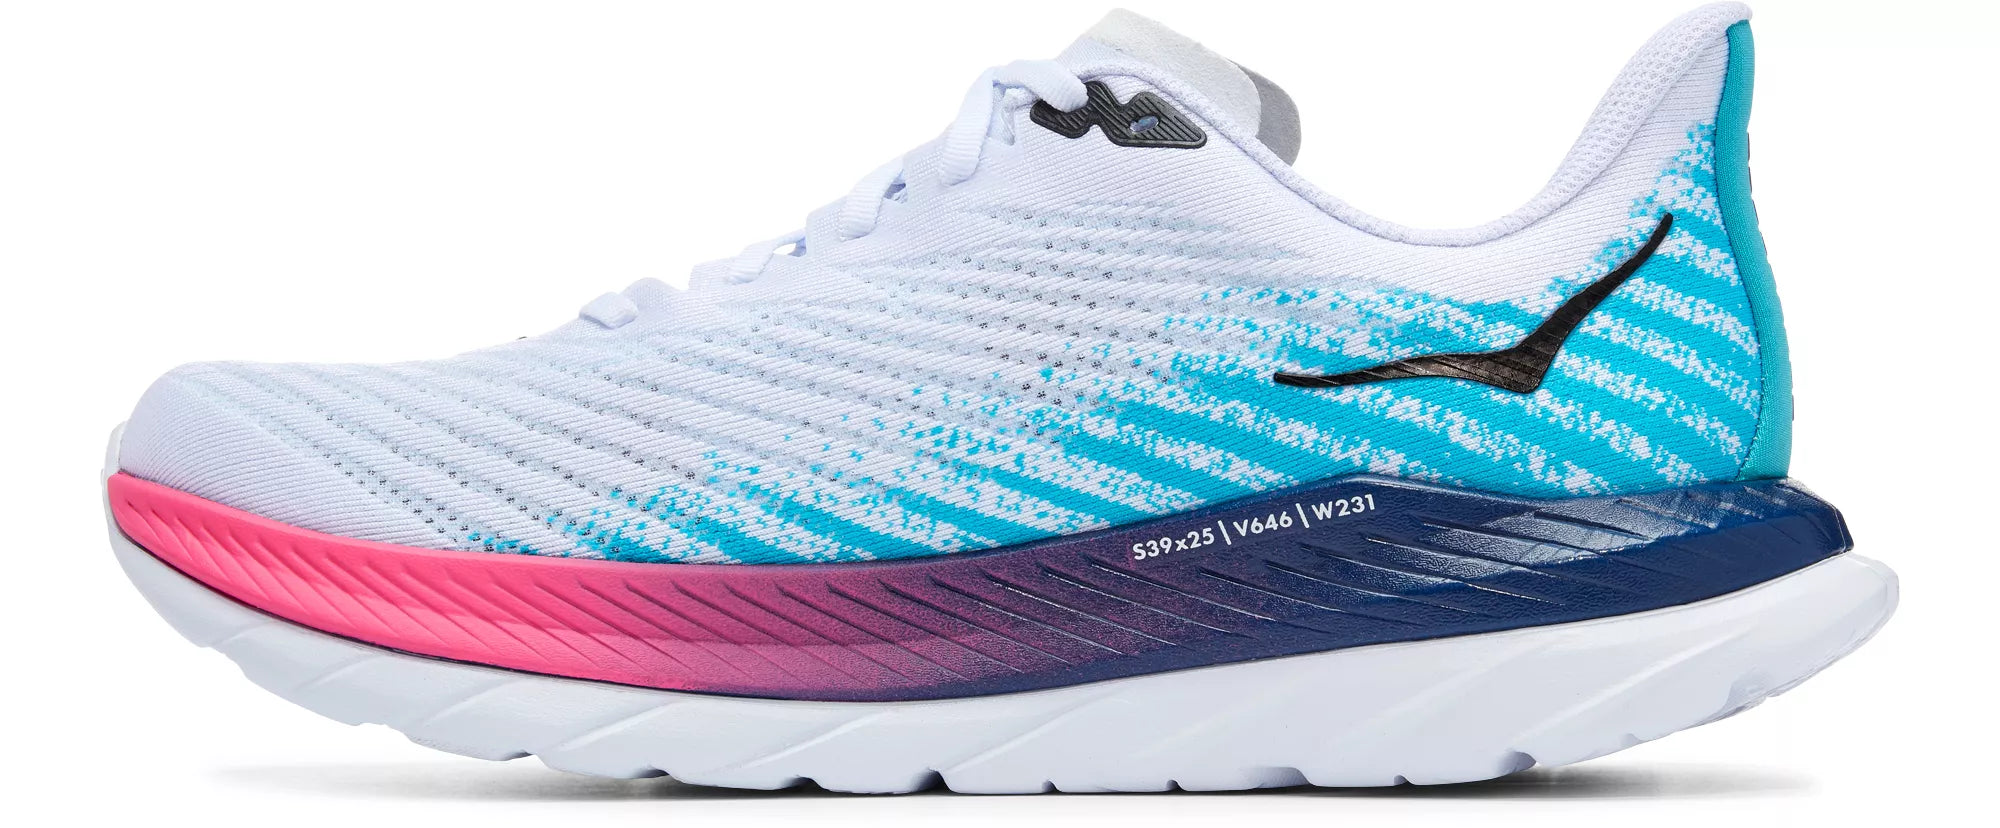 Medial view of the Men's HOKA Mach 5 in the color White/Scuba